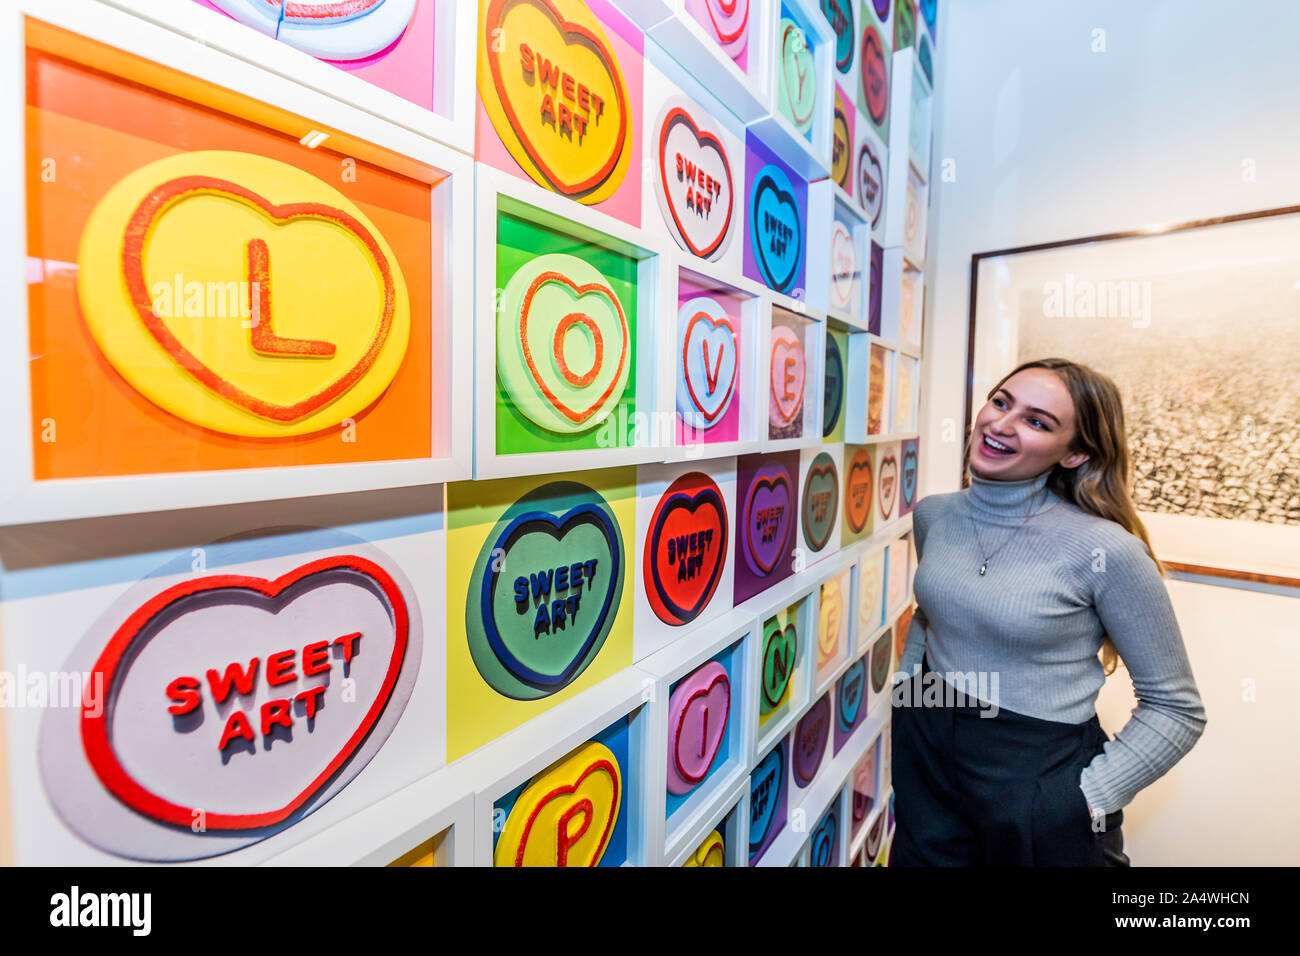 Battersea, London, UK. 16th Oct 2019. Love Hearts by Dean Zeus on TAG Fine Arts - The Affordable Art Fair opens in Battersea and runs until 20 Oct. The fair offers visitors a chance to purchase work from over 100 galleries at prices between £100 and £6,000 Credit: Guy Bell/Alamy Live News Stock Photo